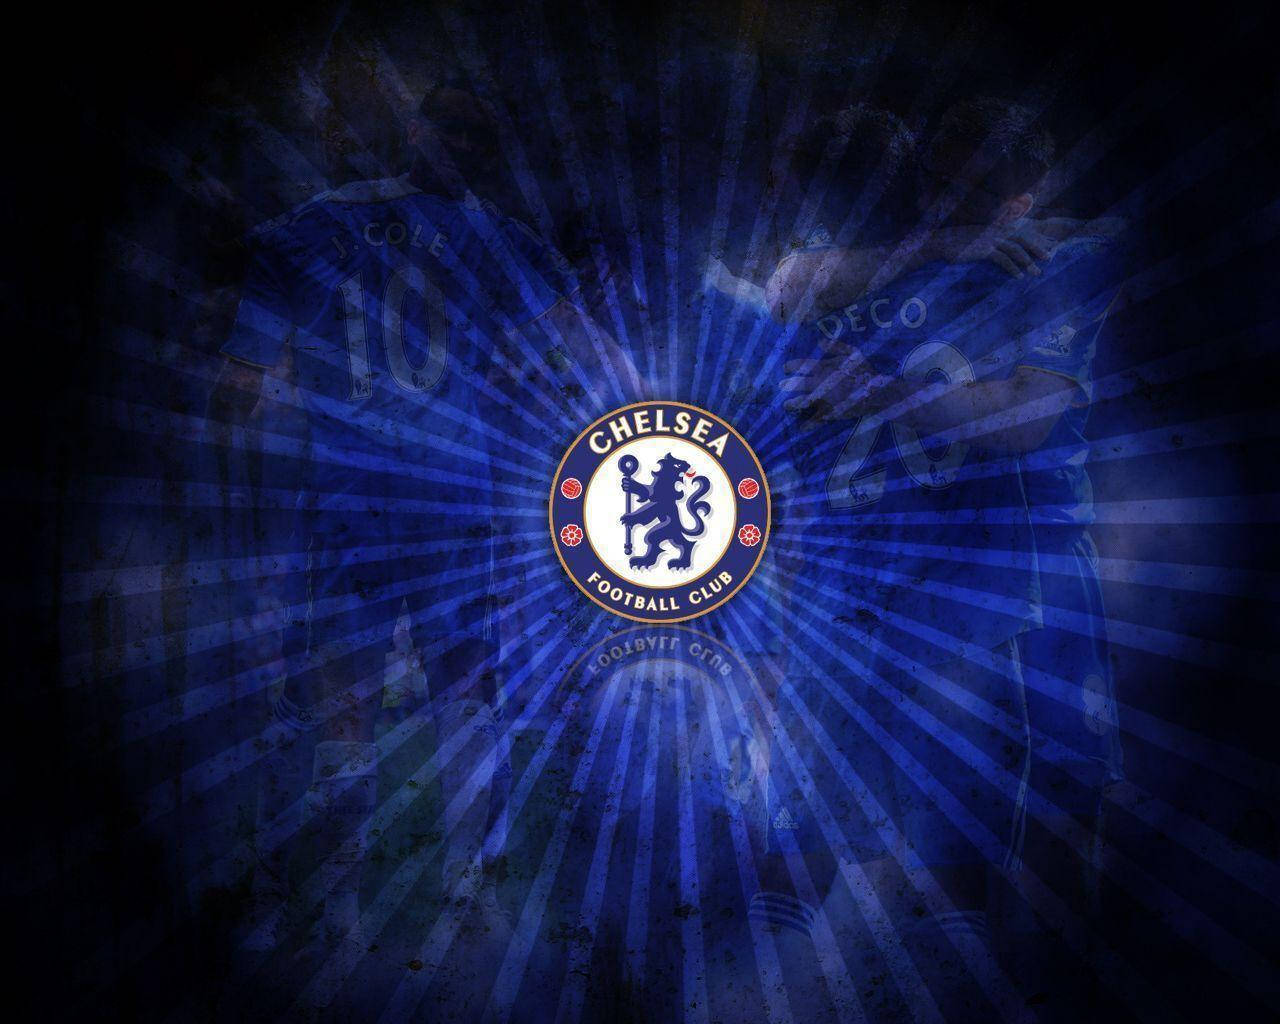 Chelsea Fc Badge With Blue Rays Background